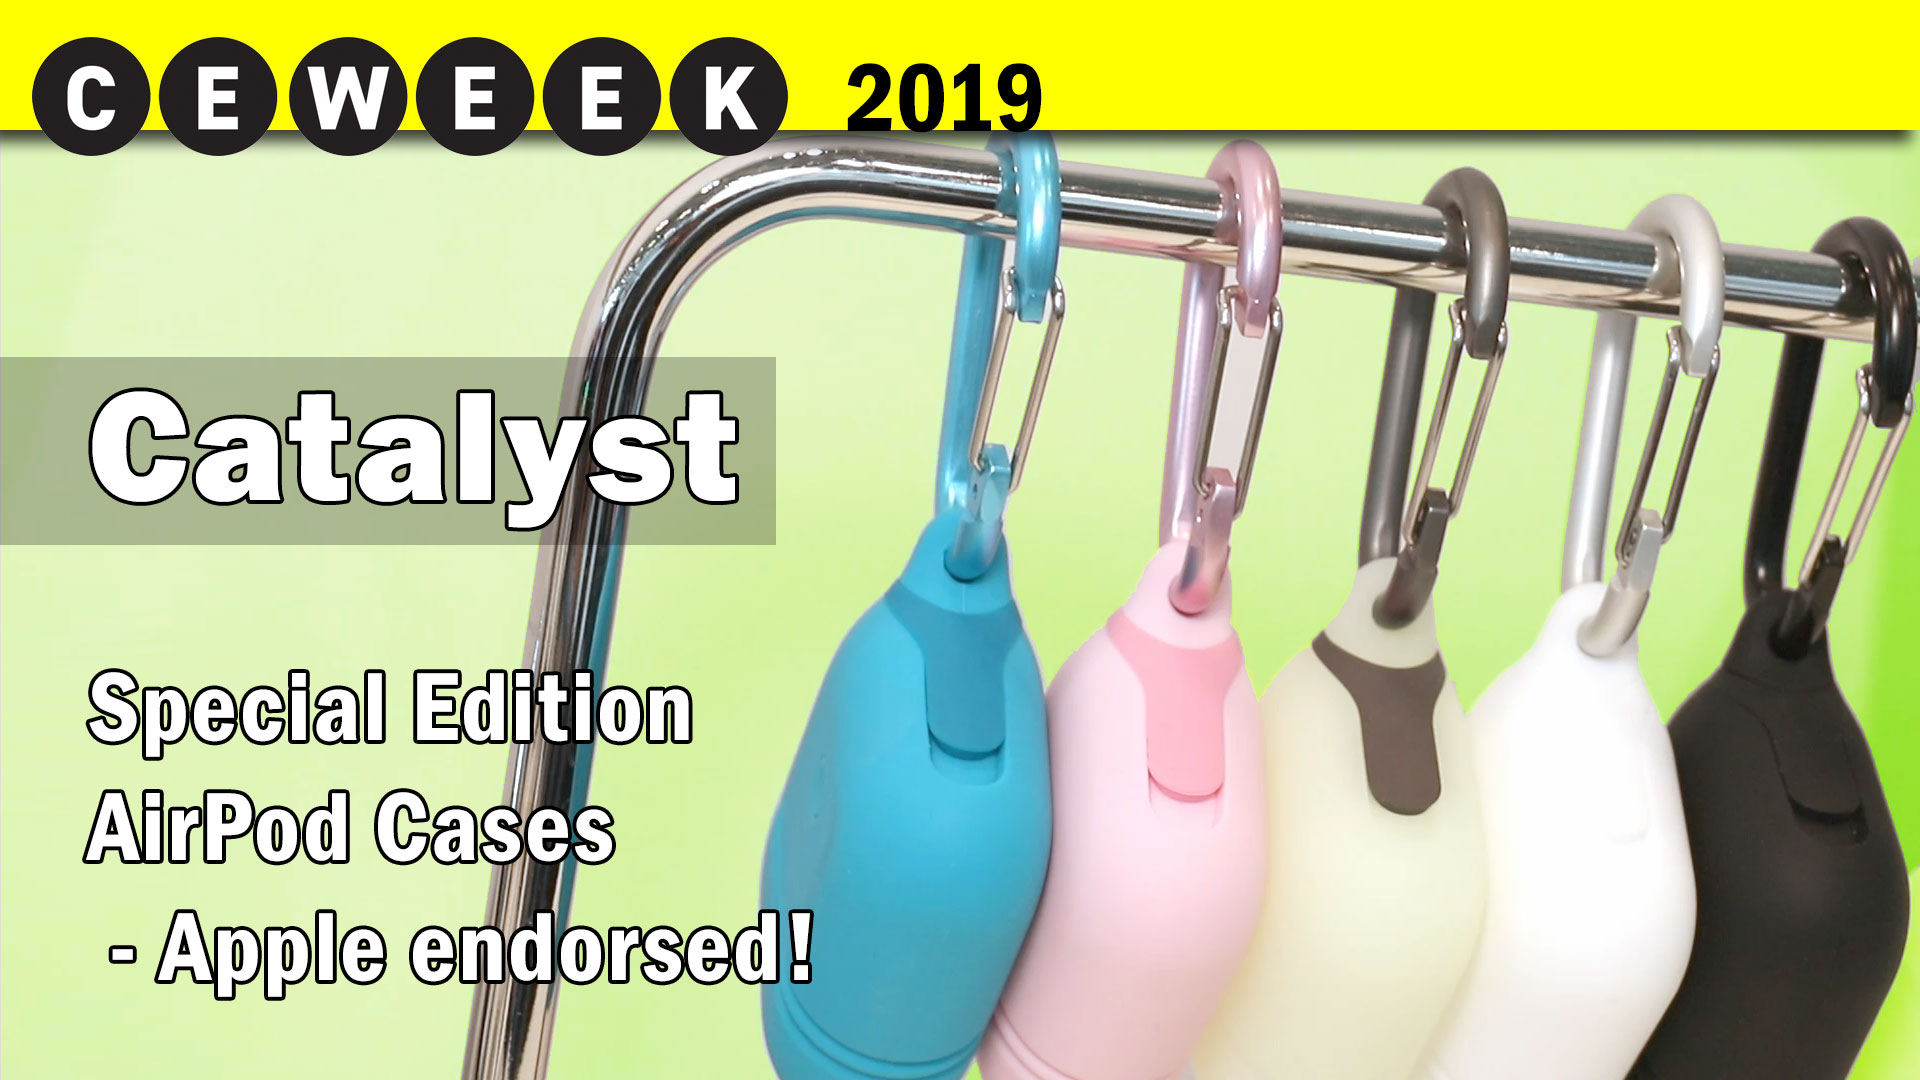 Catalyst AirPod Cases @ CE Week 2019